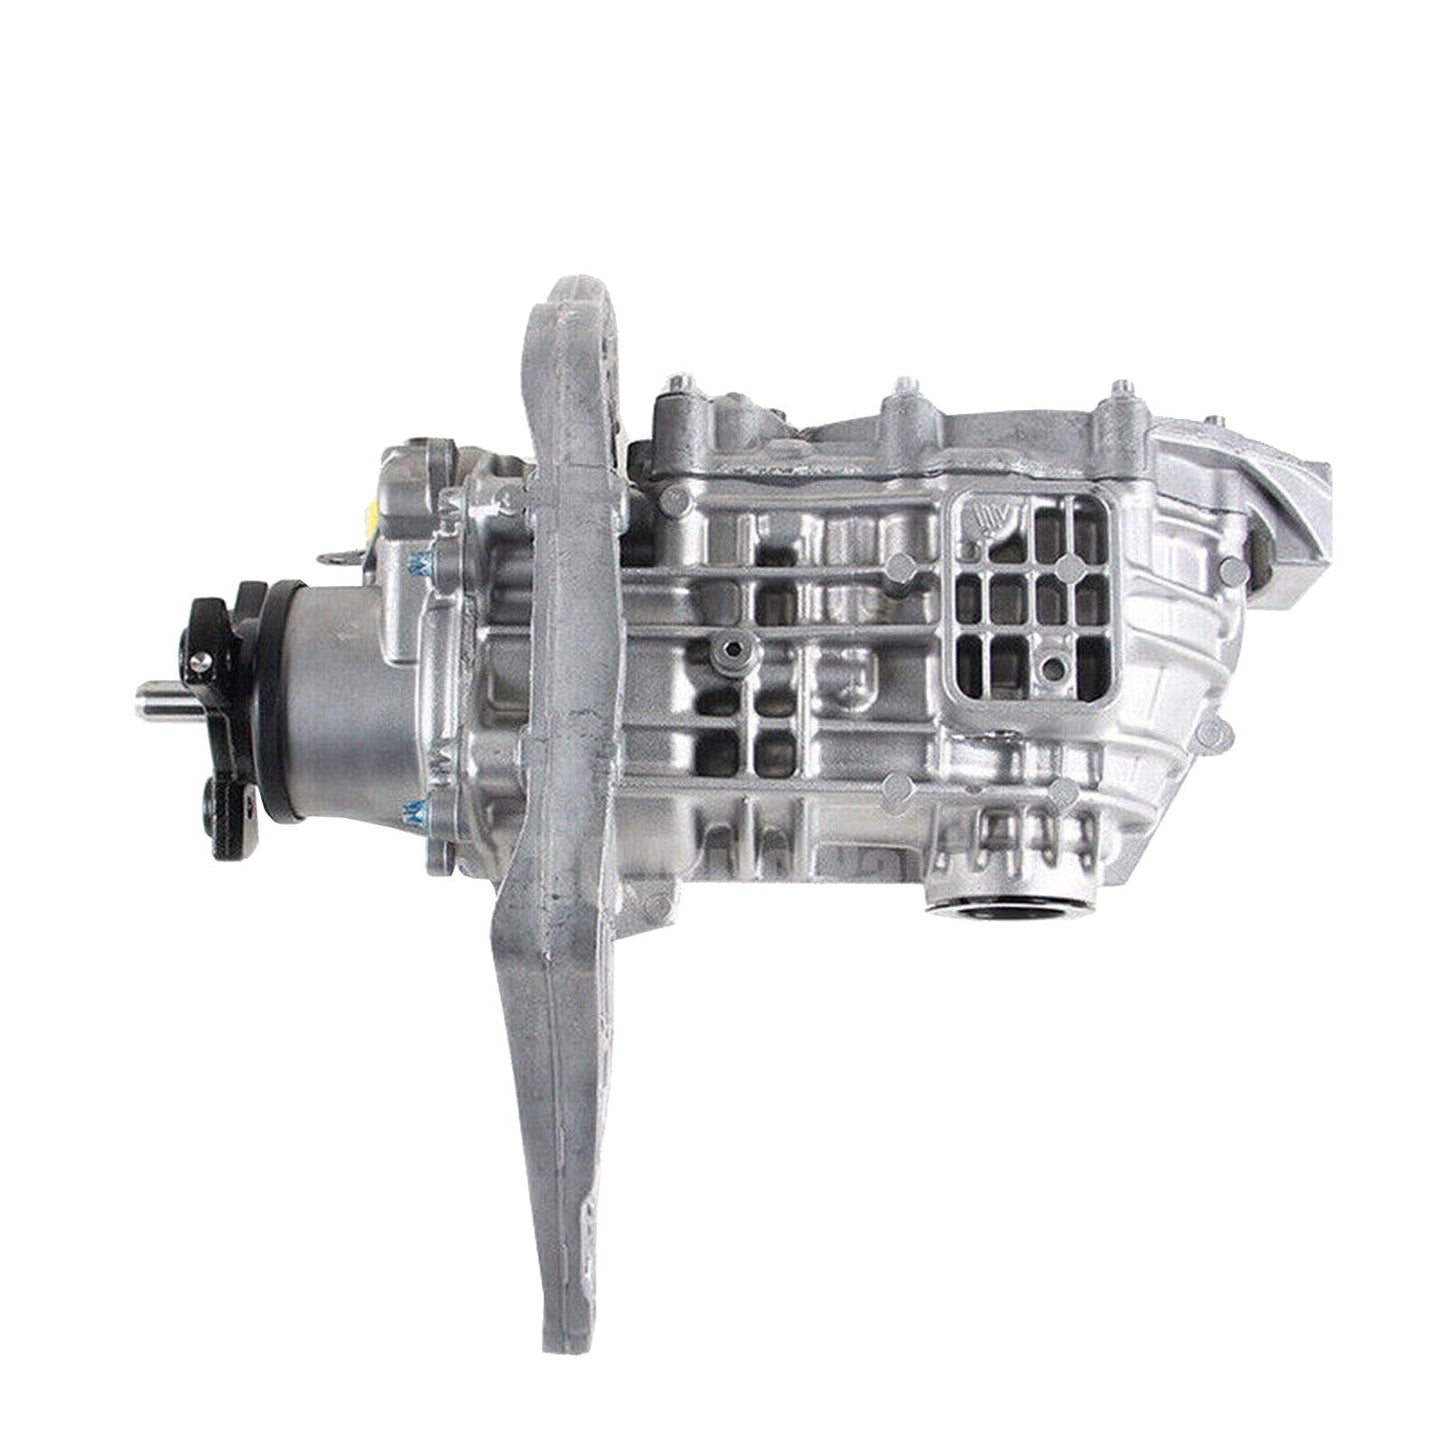 Mercedes Benz W117 CLA 220 4-MATIC Rear Differential Assembly A2463500802